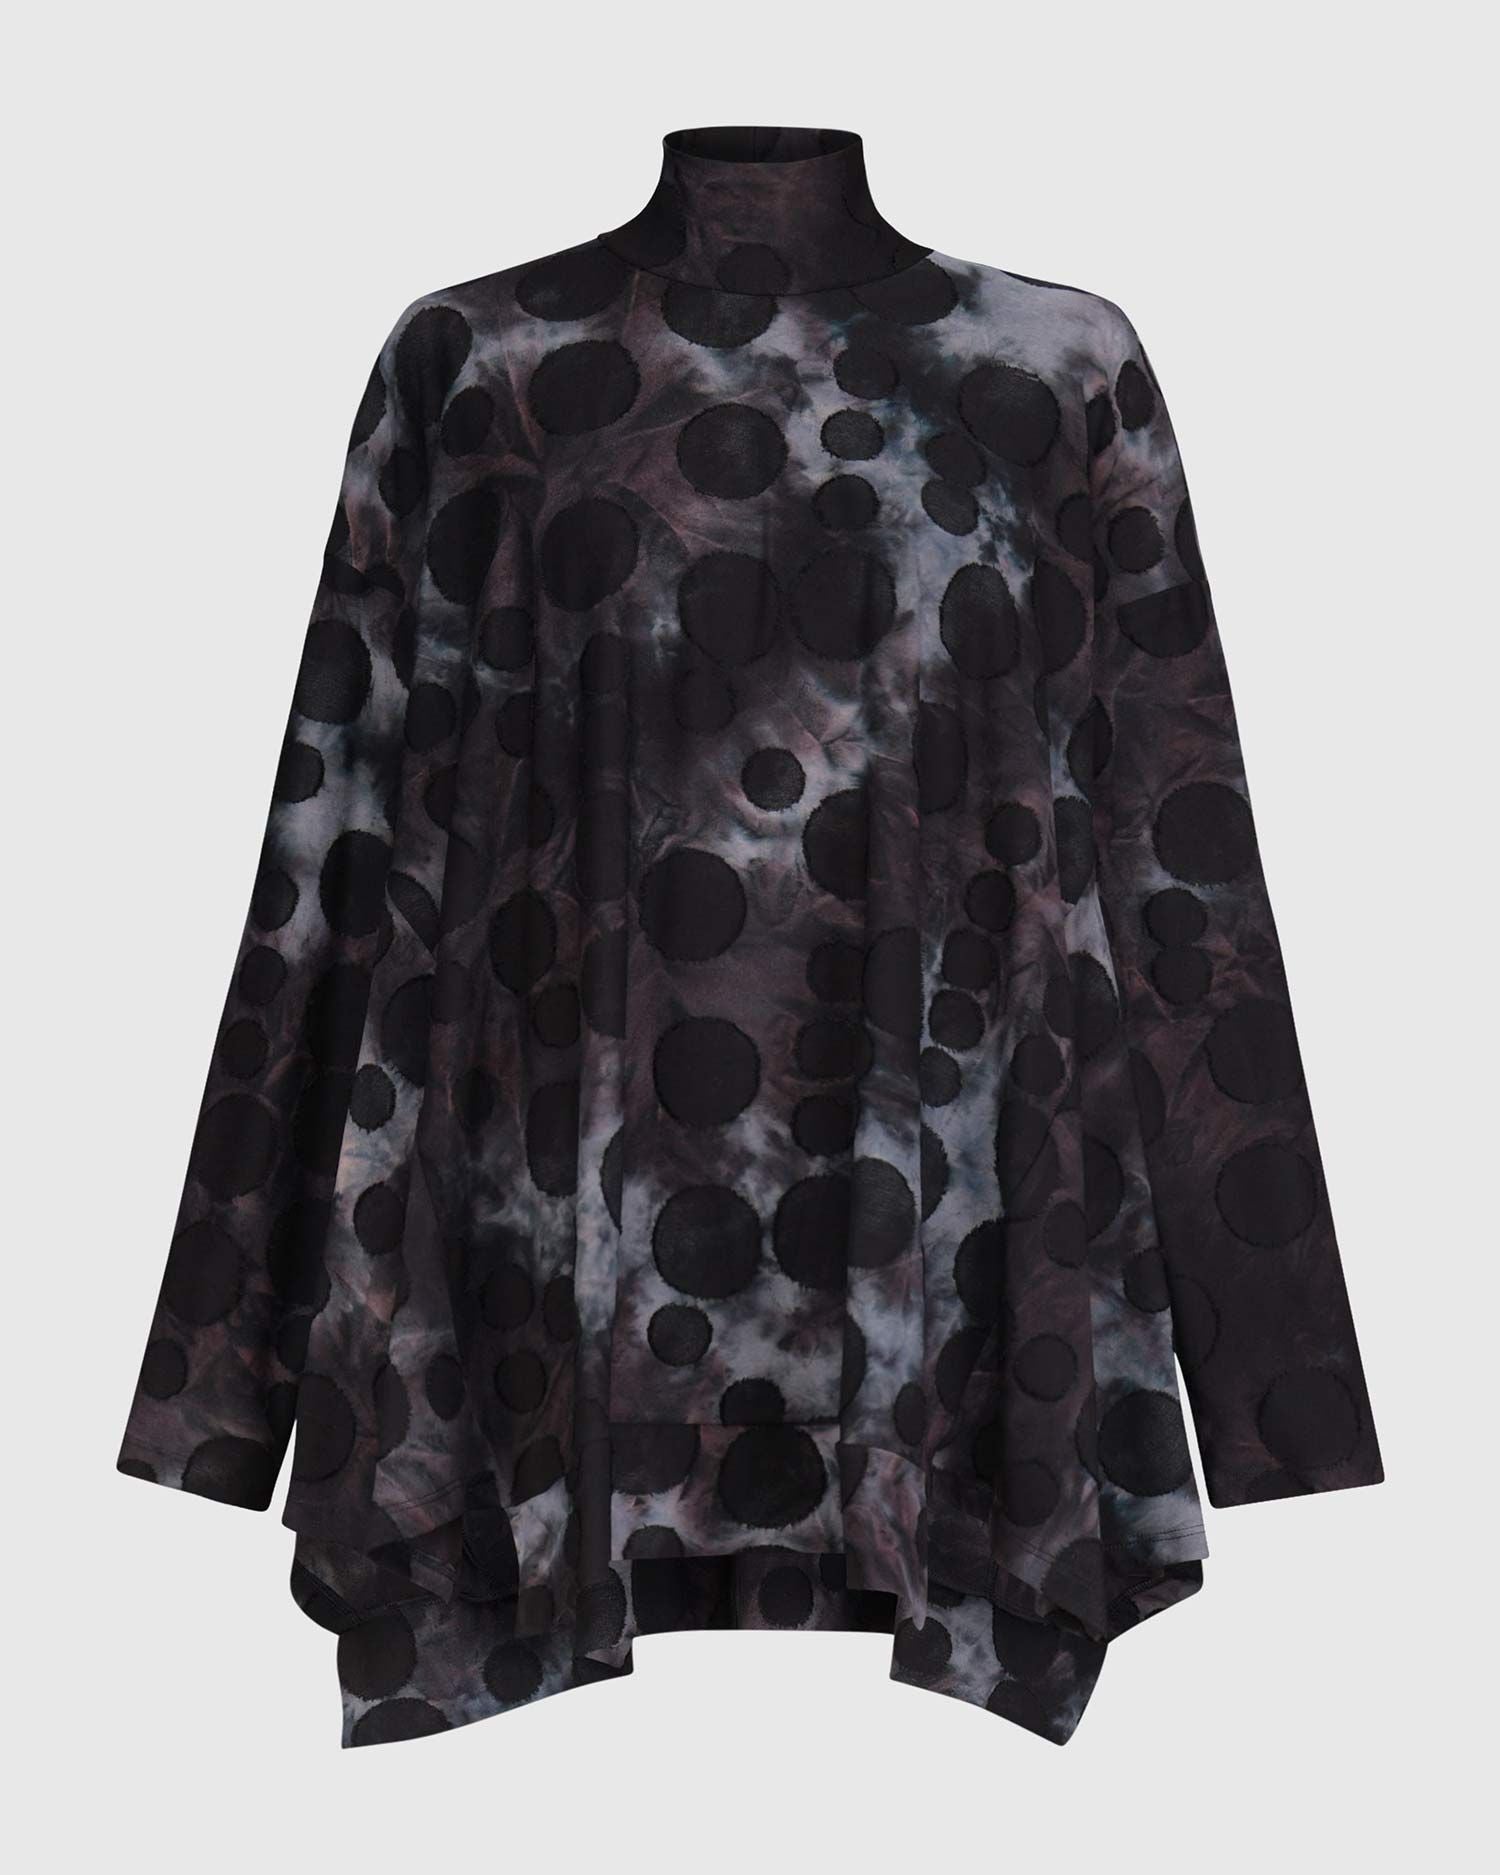 Front view of the alembika swing top in smoke. This top is black, grey, and blue tie dye with black dots all over it. The top has a mock neck, long sleeves, and a wide flowy silhouette with a stepped hem.